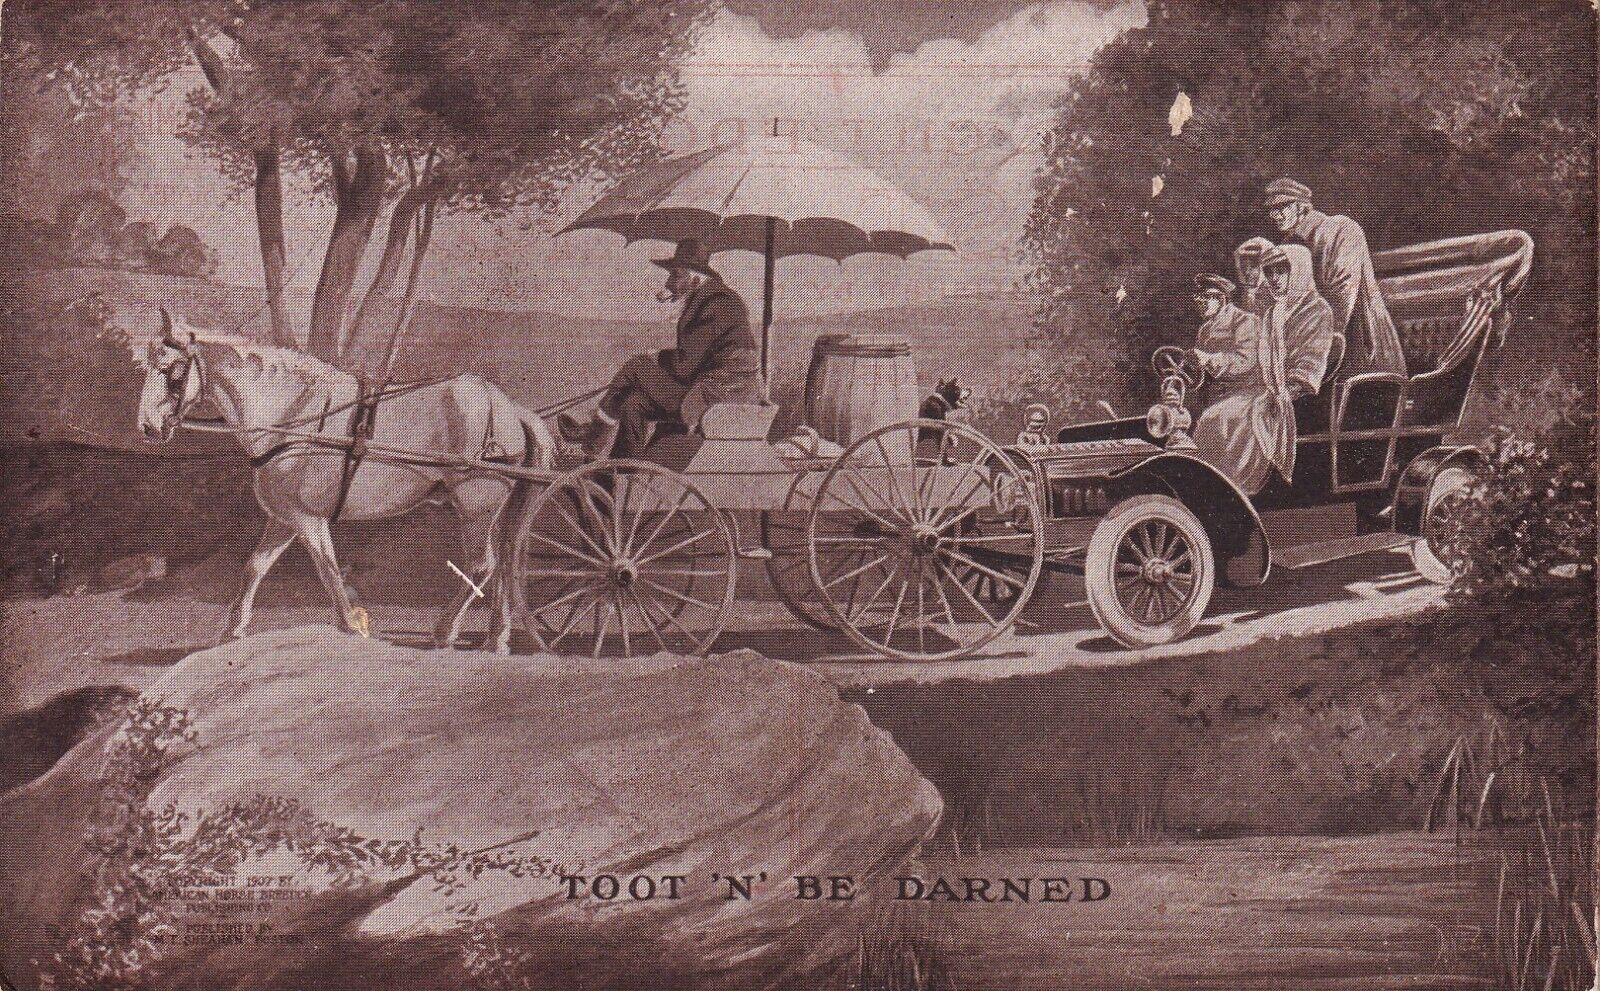 Vintage Toot N Be Darned Auto Car Behind Horse and Carriage Postcard Early 1900s